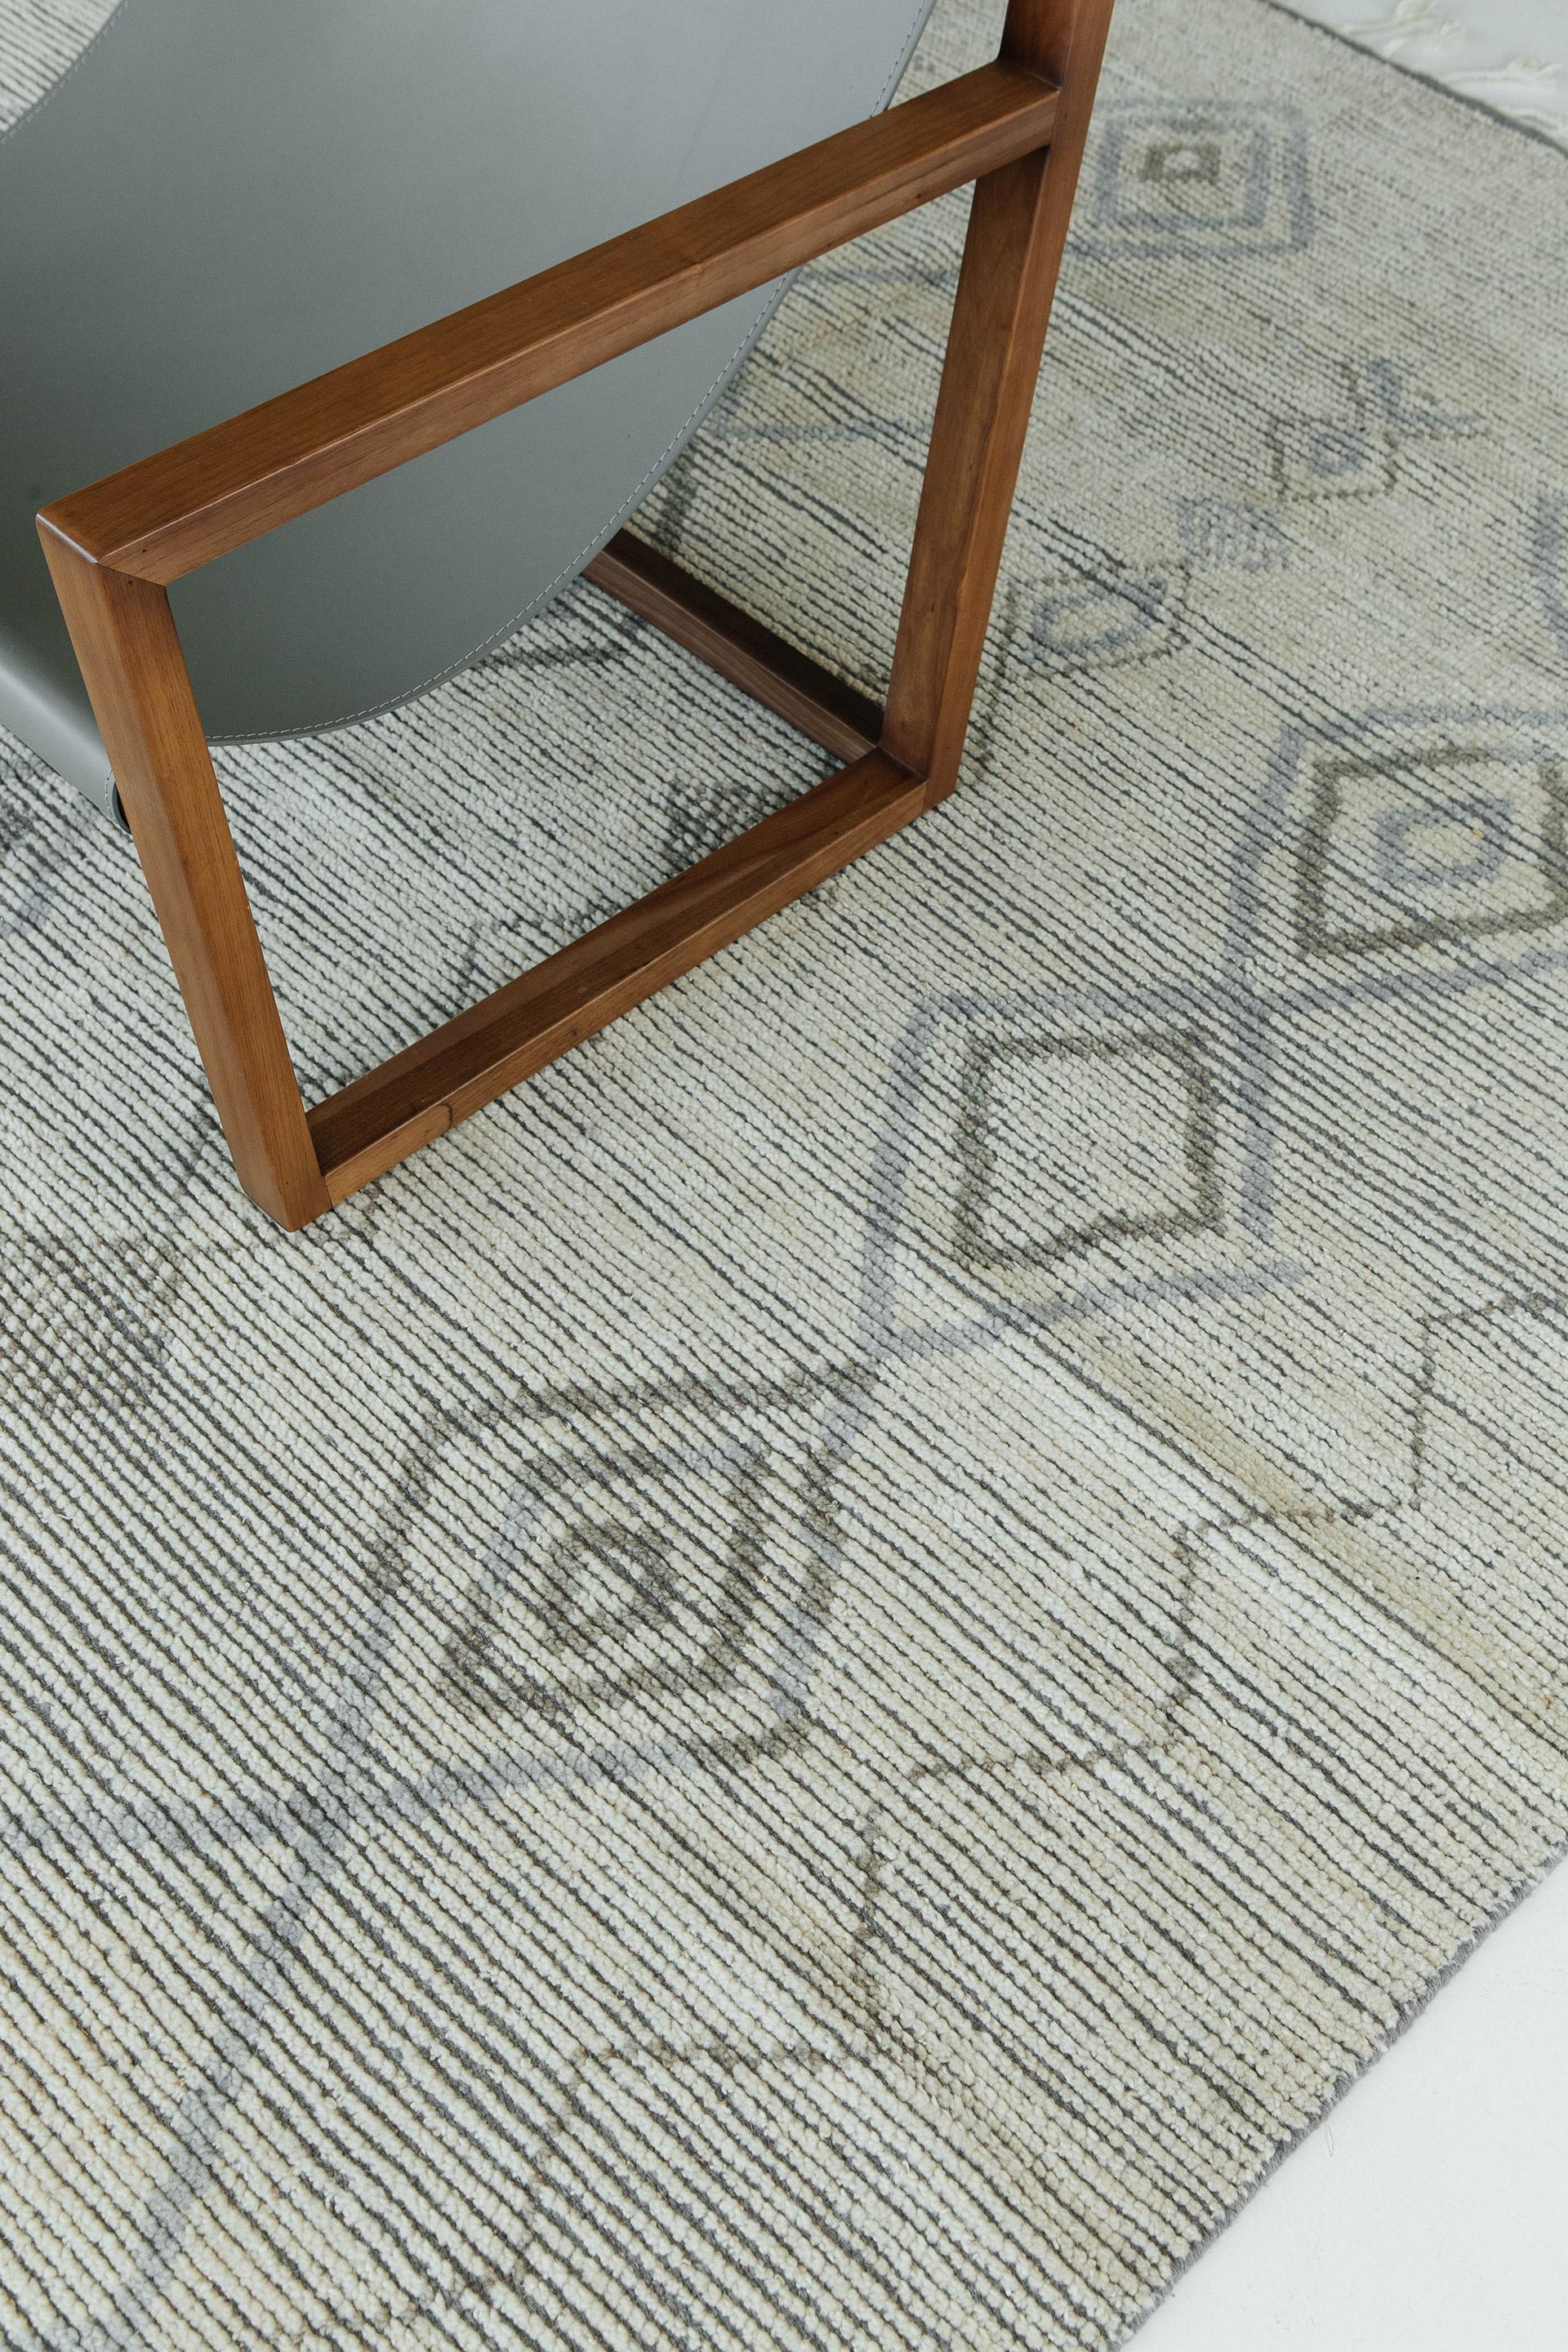 Wool Zonda, Atlas Collection by Mehraban Rugs For Sale